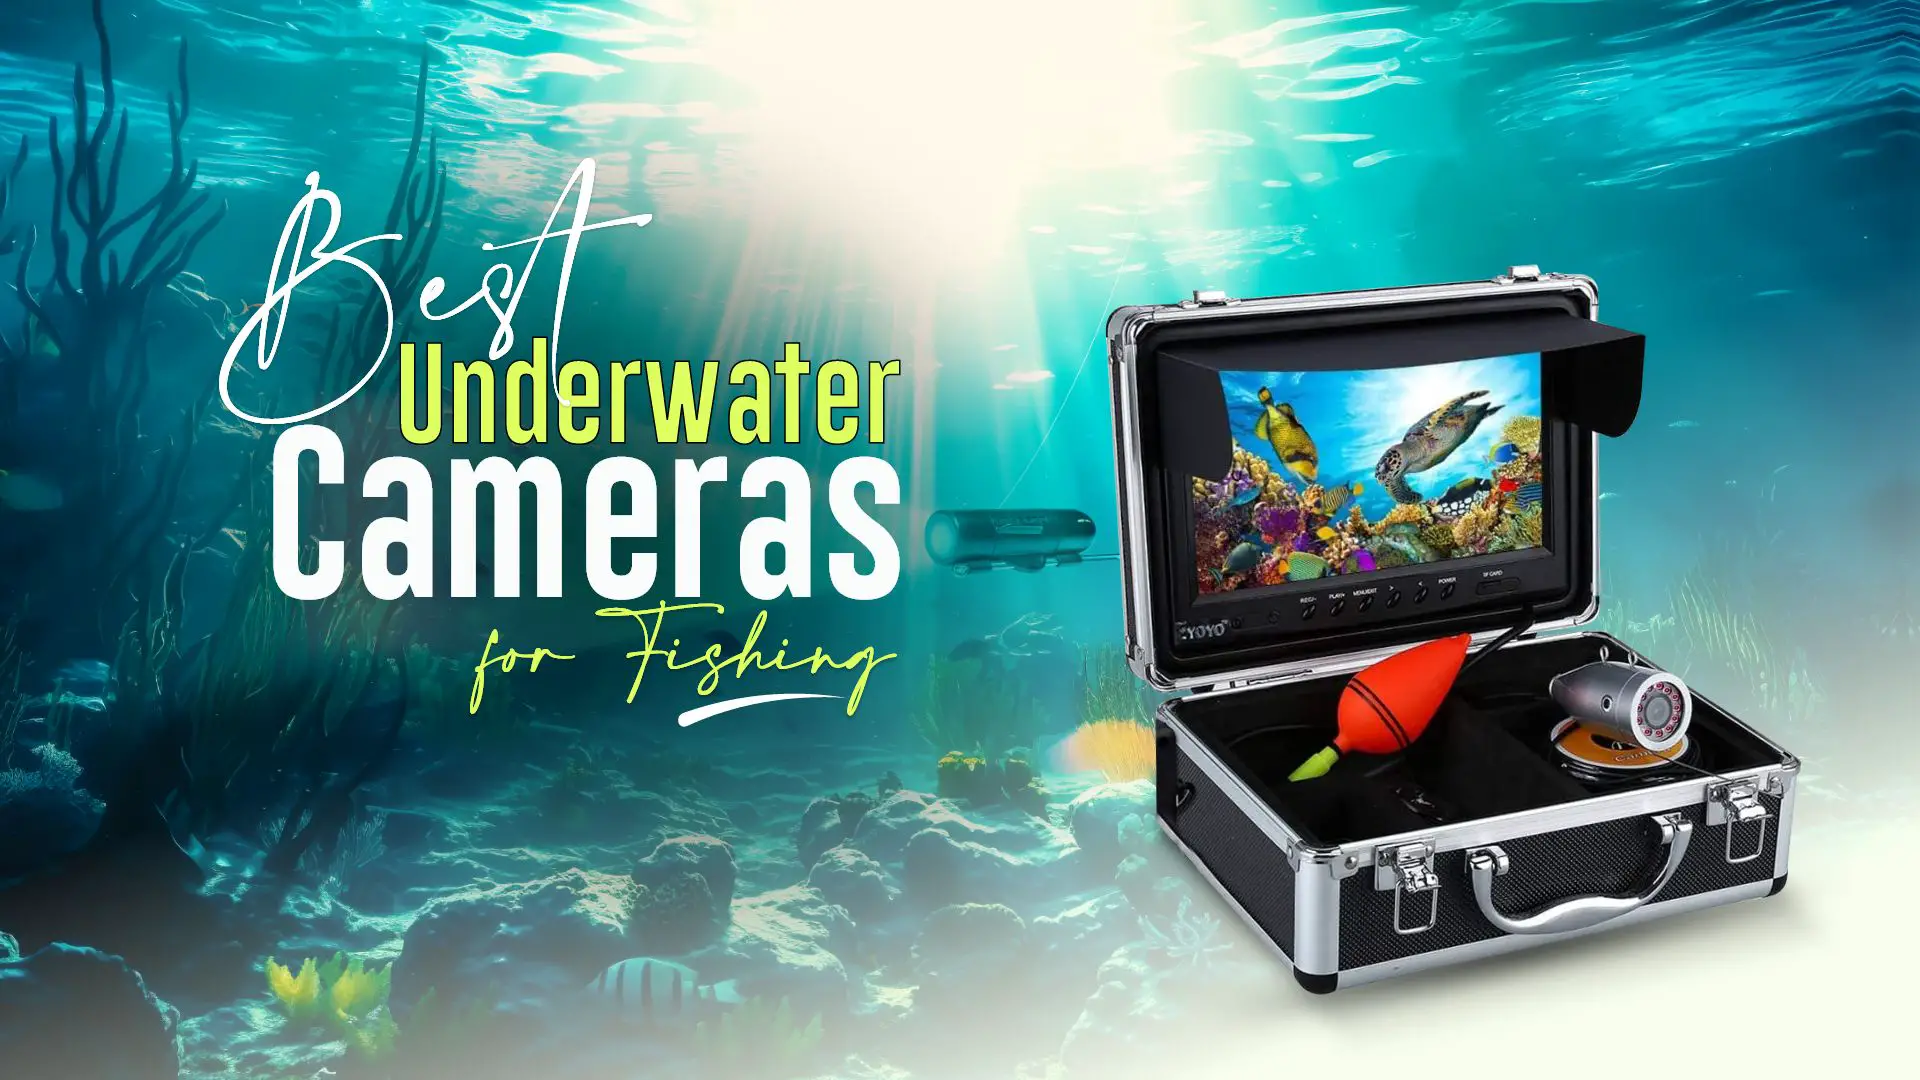 Fish Finder Vs Underwater Camera: Which One Delivers the Ultimate Underwater Adventure?